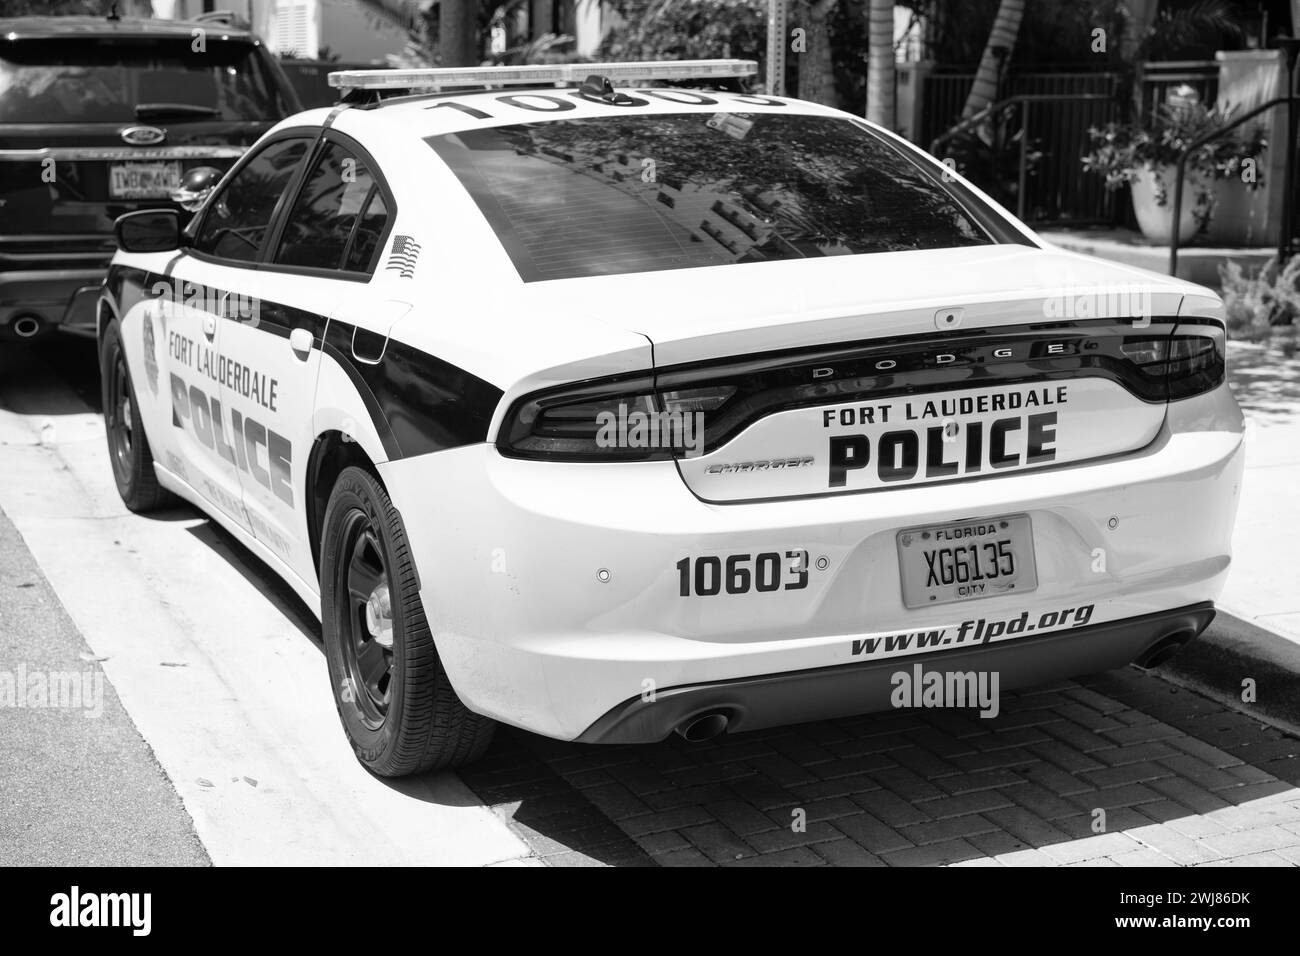 Miami, Florida USA - March 25, 2023: Dodge Charger police emergency car in miami fort lauderdale, back view. Stock Photo